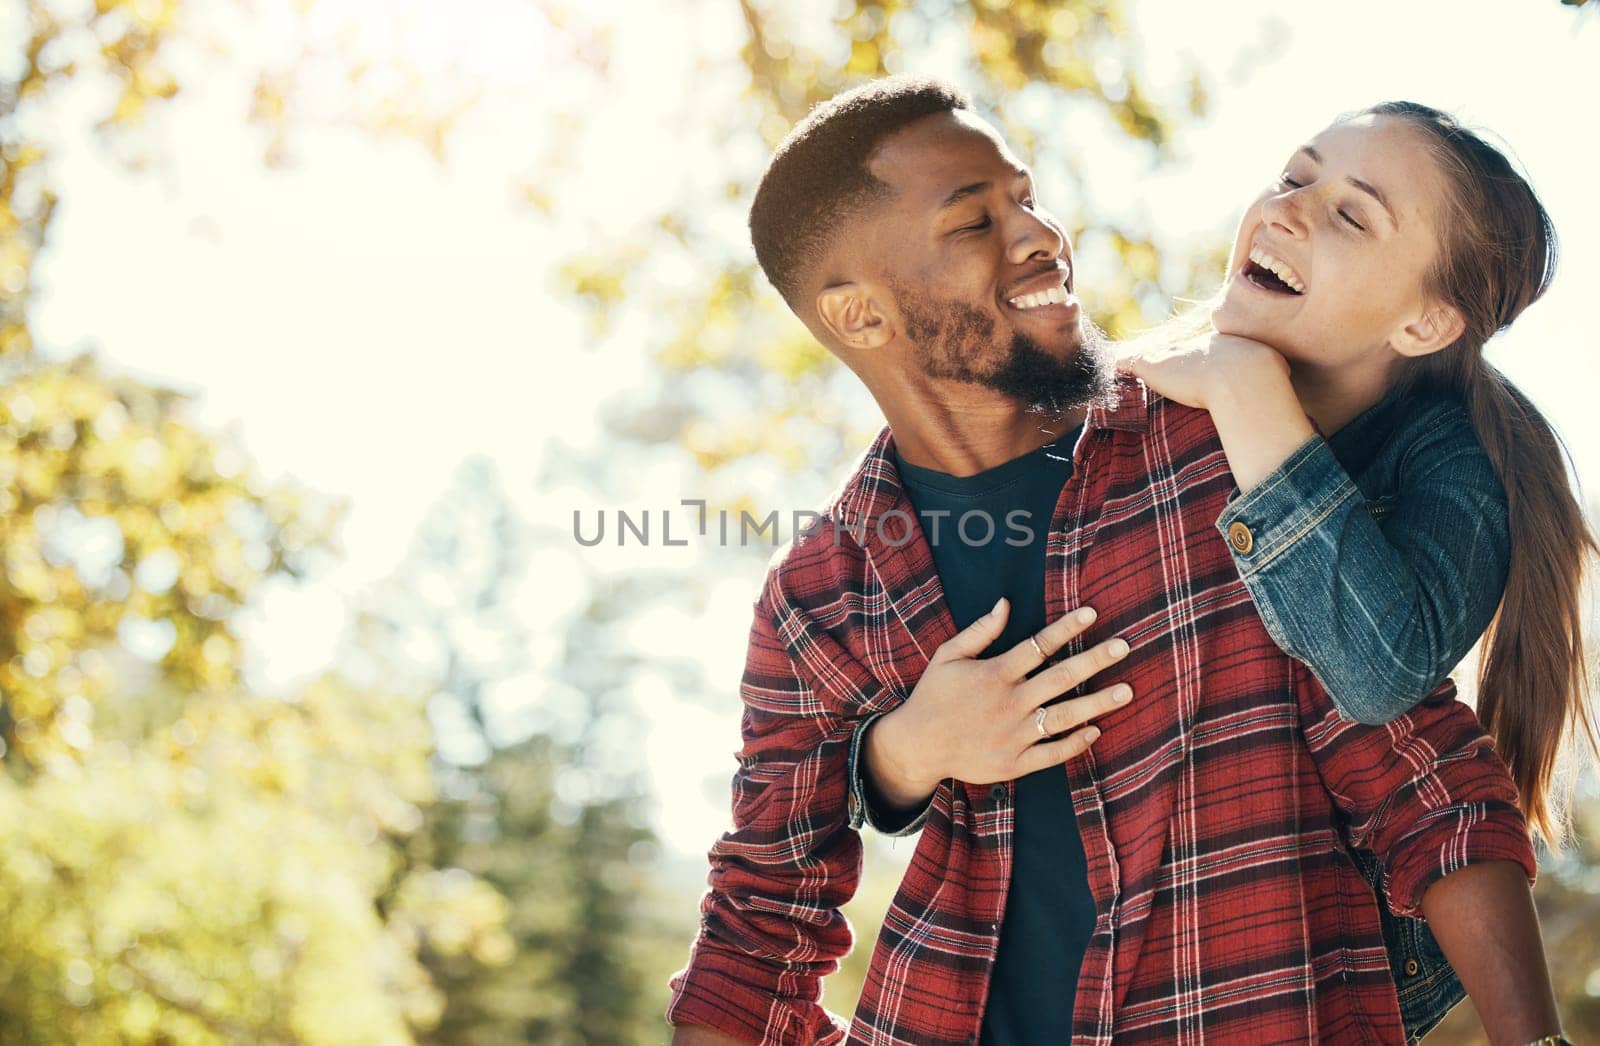 Couple, hug and smile while outdoor with love and care in nature, happy together while bonding in park. Black man, woman and interracial, hugging in relationship and marriage with romance mock up